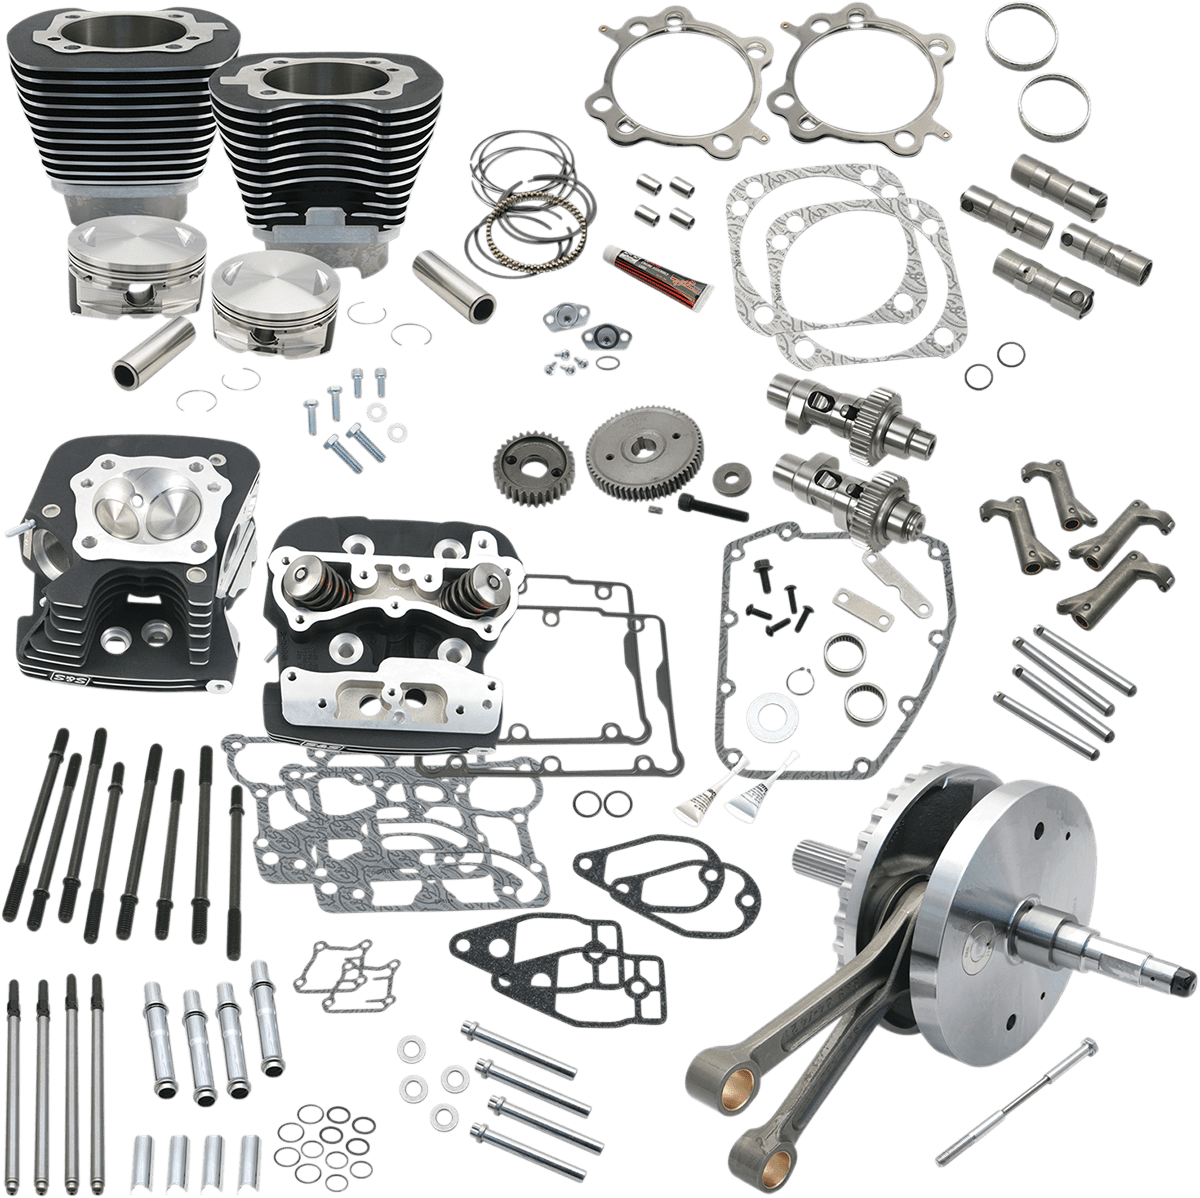 S&S CYCLES-124" Hot Set Up® Engine Performance Kits / '99-'17 Twin Cams-Big Bore Kit-MetalCore Harley Supply